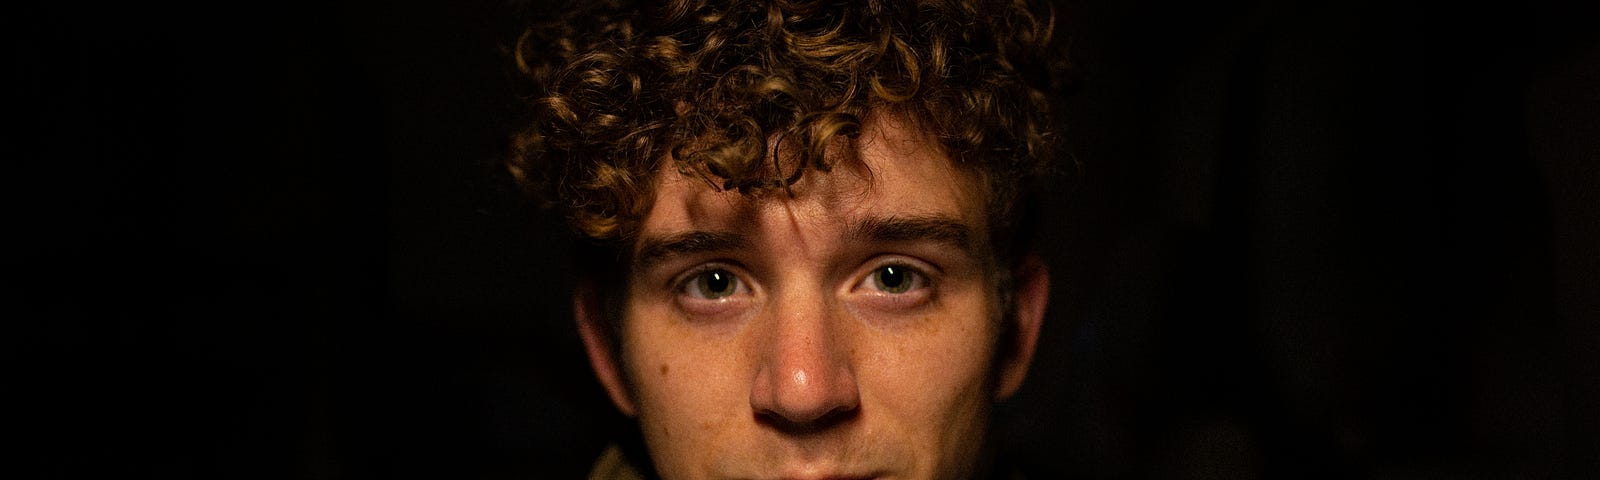 A boy with brown jacket and curly hair, standing in dark with slightly wet eyes.